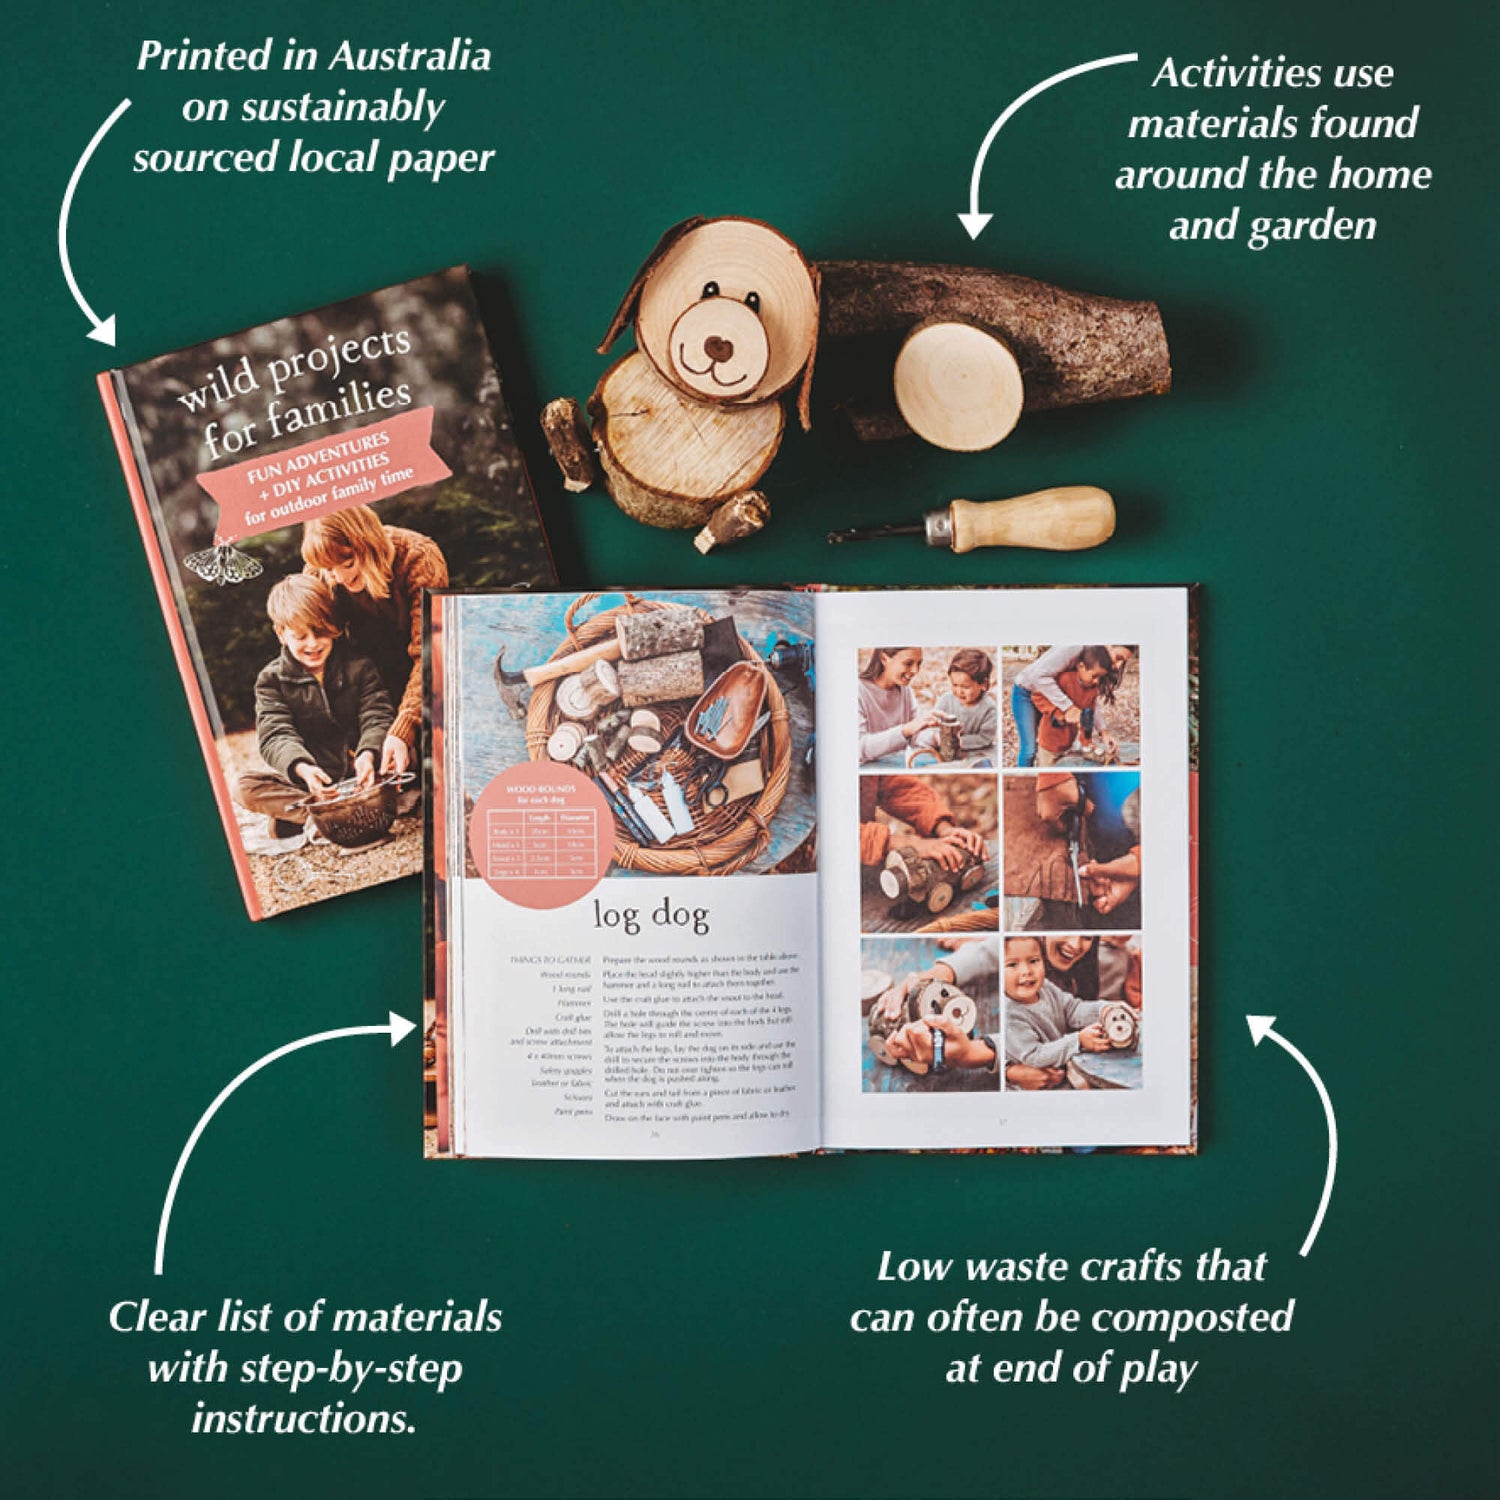 Pages from Wild Projects for Families book has fun adventures and DIY activities for family outdoor time, is made in Australia by Your Wild Books.